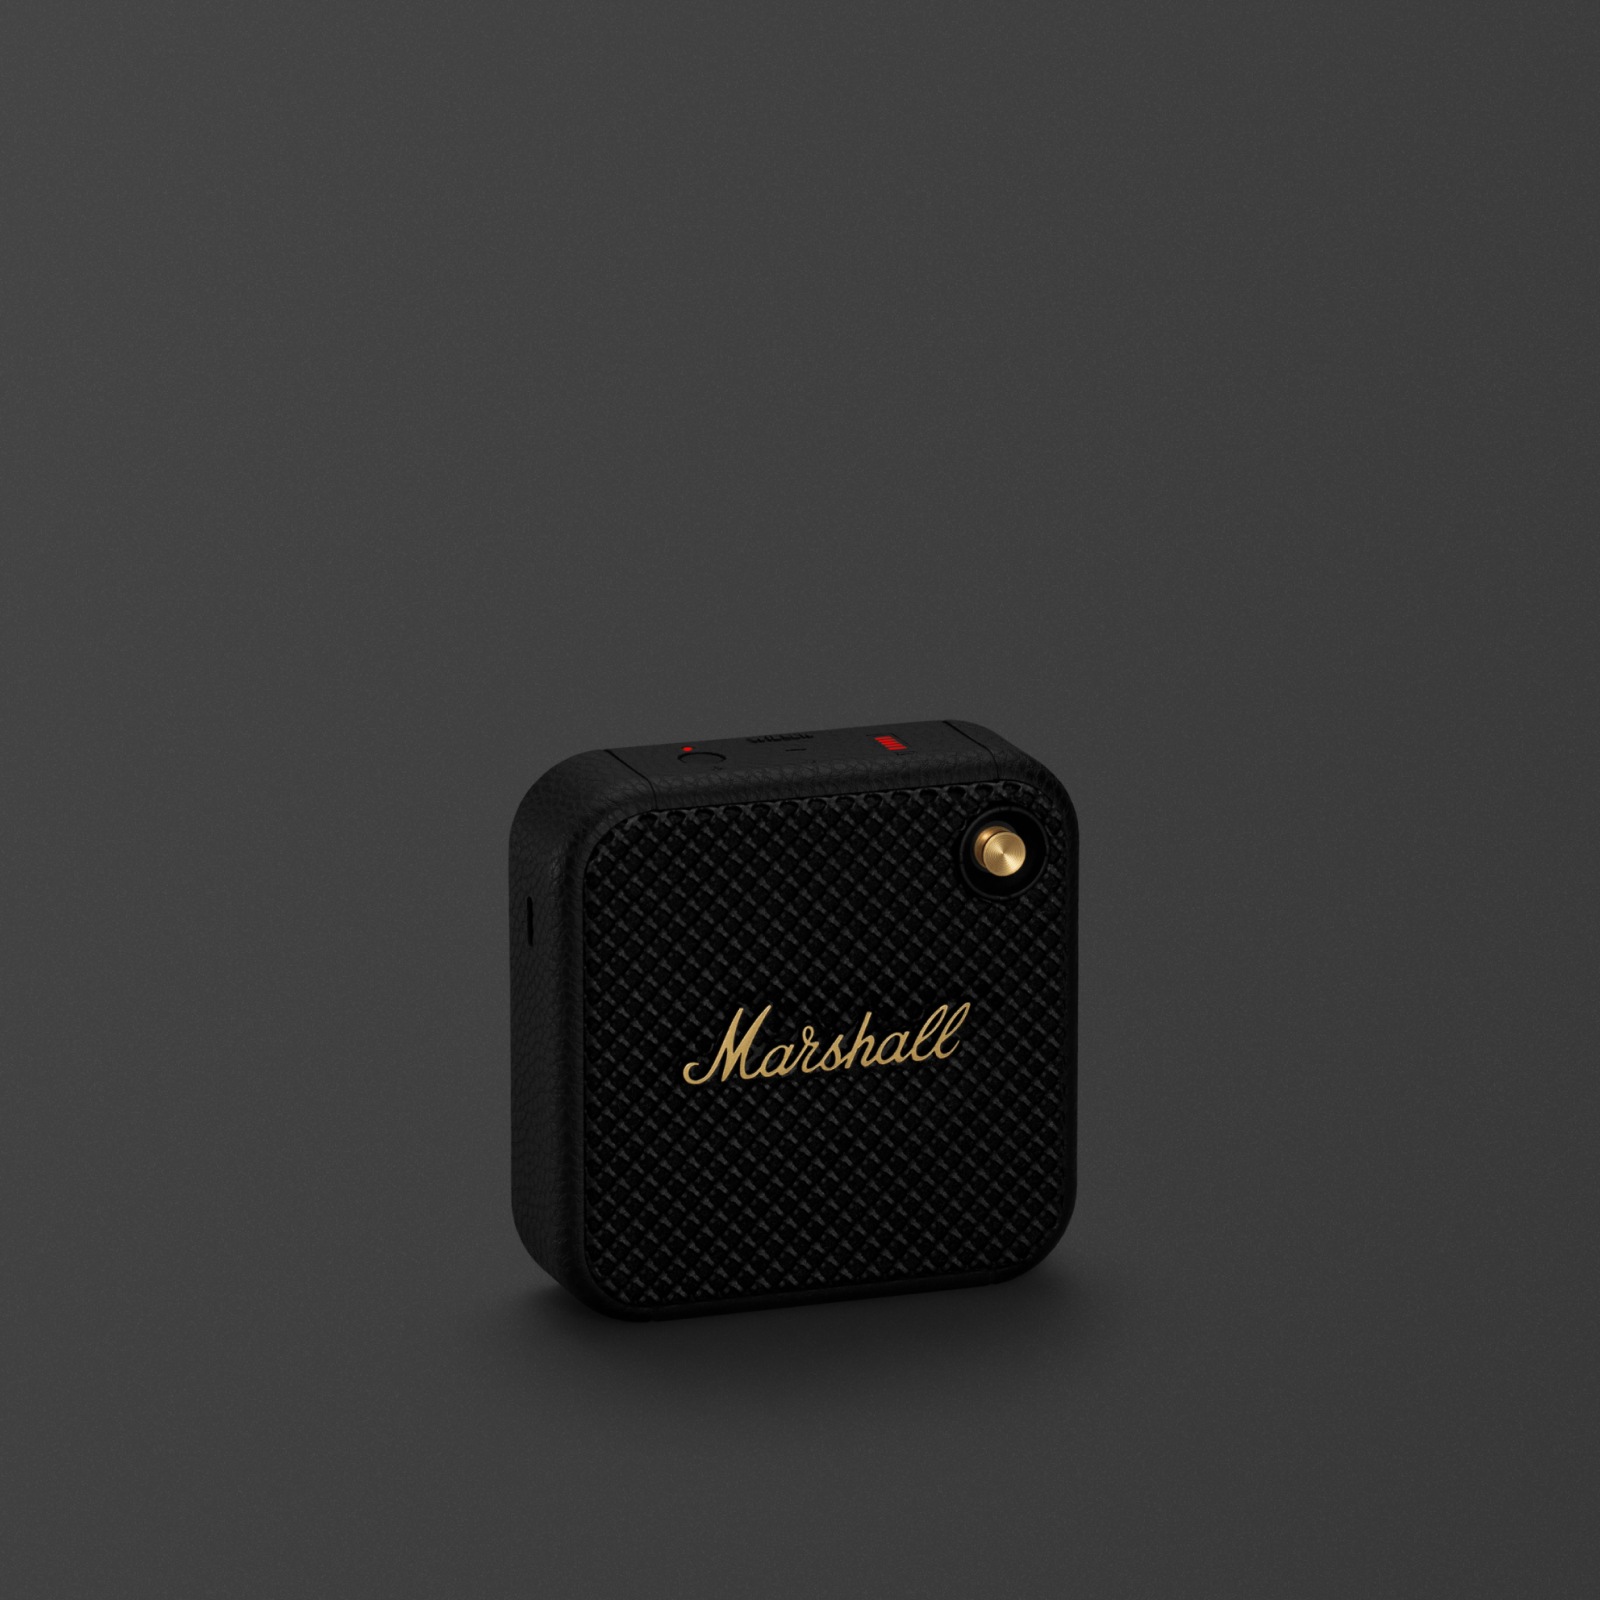 Marshall Willen black and brass speaker - black. This wireless speaker is the perfect portable companion, providing exceptional sound quality in a sleek black design.